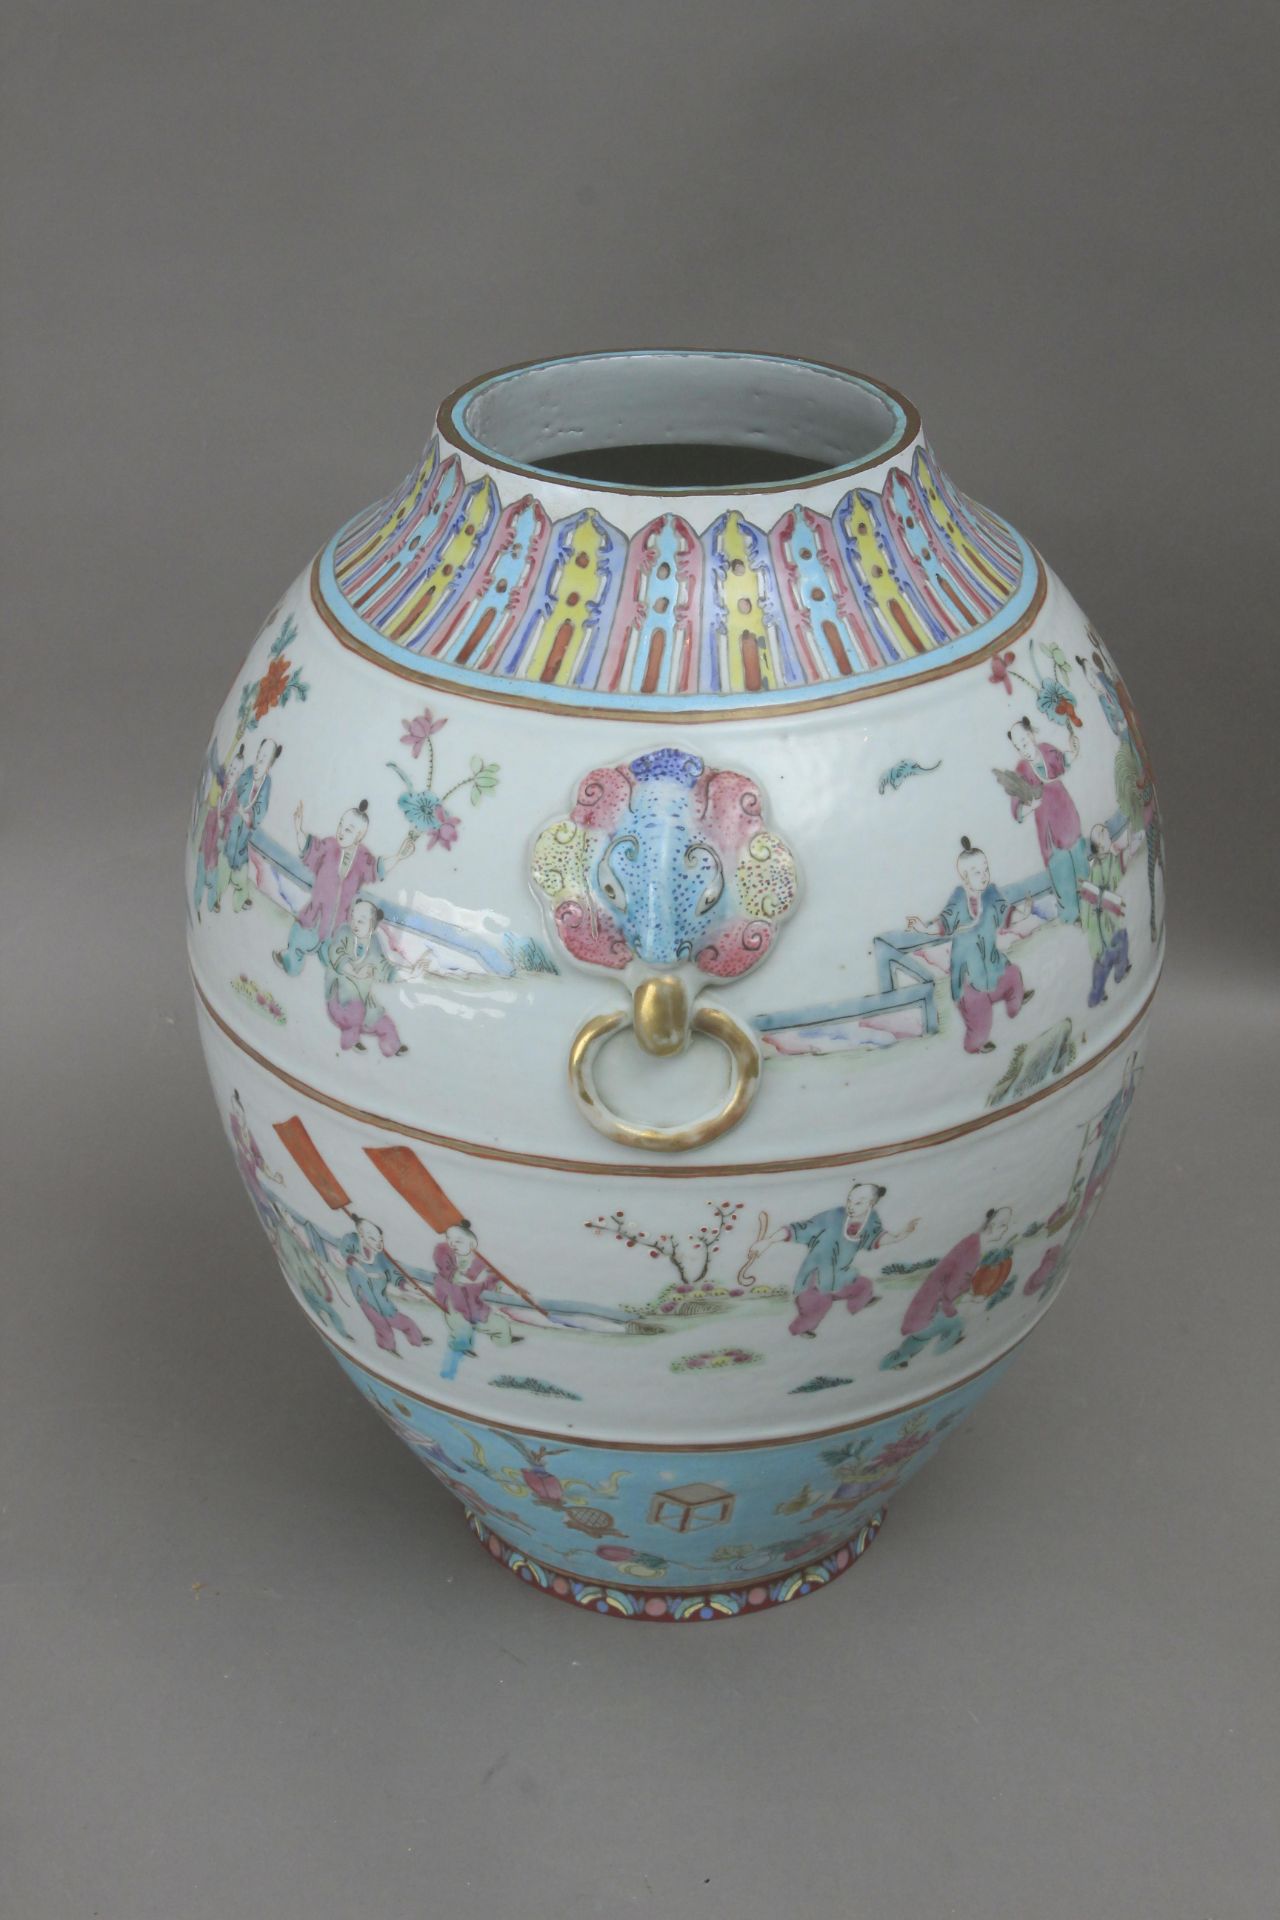 A 19th century Chinese vase from Qing dynasty in Canton porcelain - Image 2 of 8